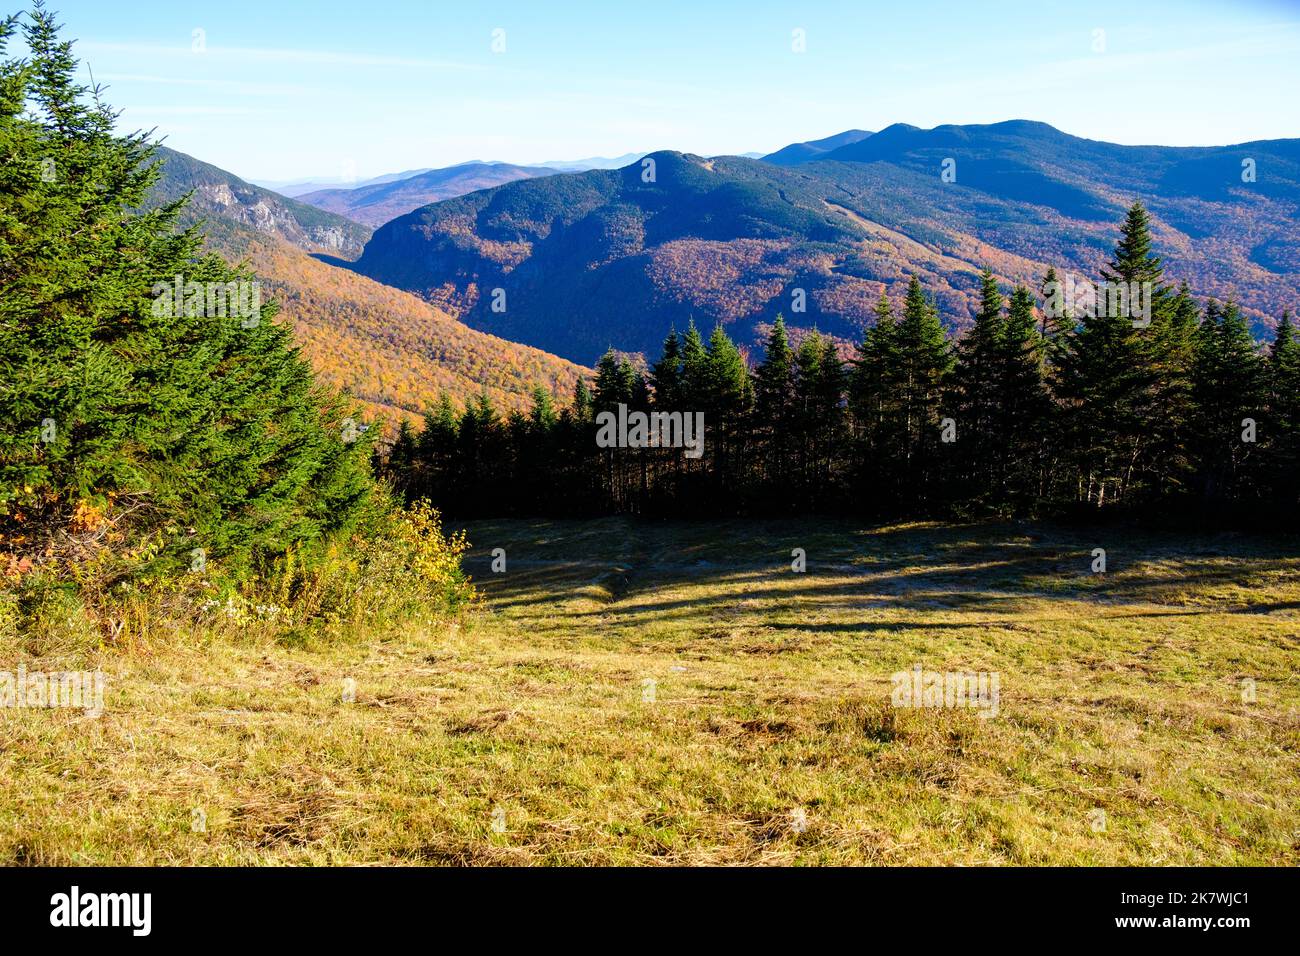 Views of Smugglers Notch below Mt. Mansfield, Stowe, VT, New England, USA, the highest mountain in Vermont. Stock Photo